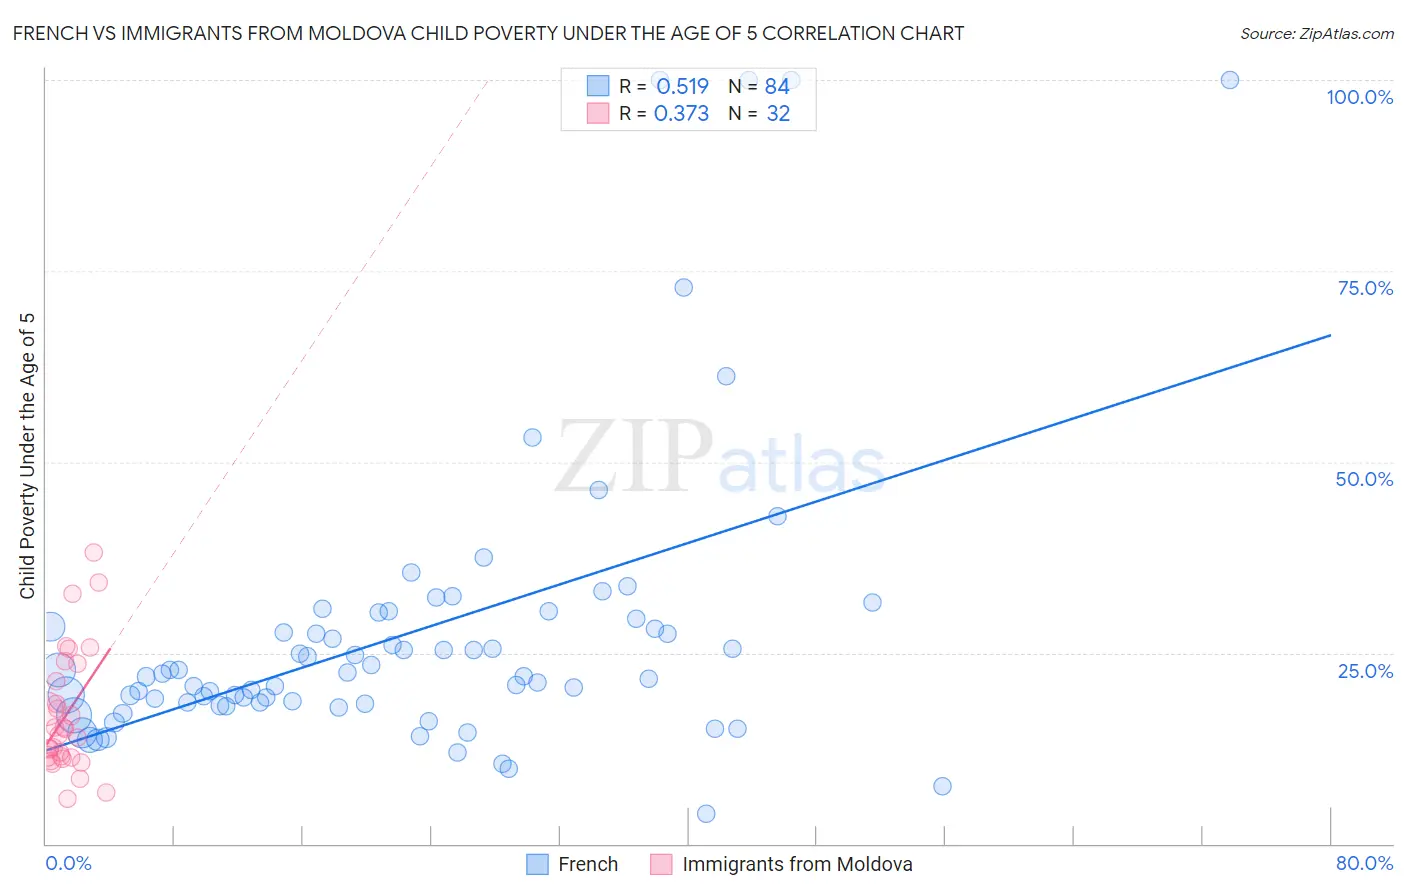 French vs Immigrants from Moldova Child Poverty Under the Age of 5